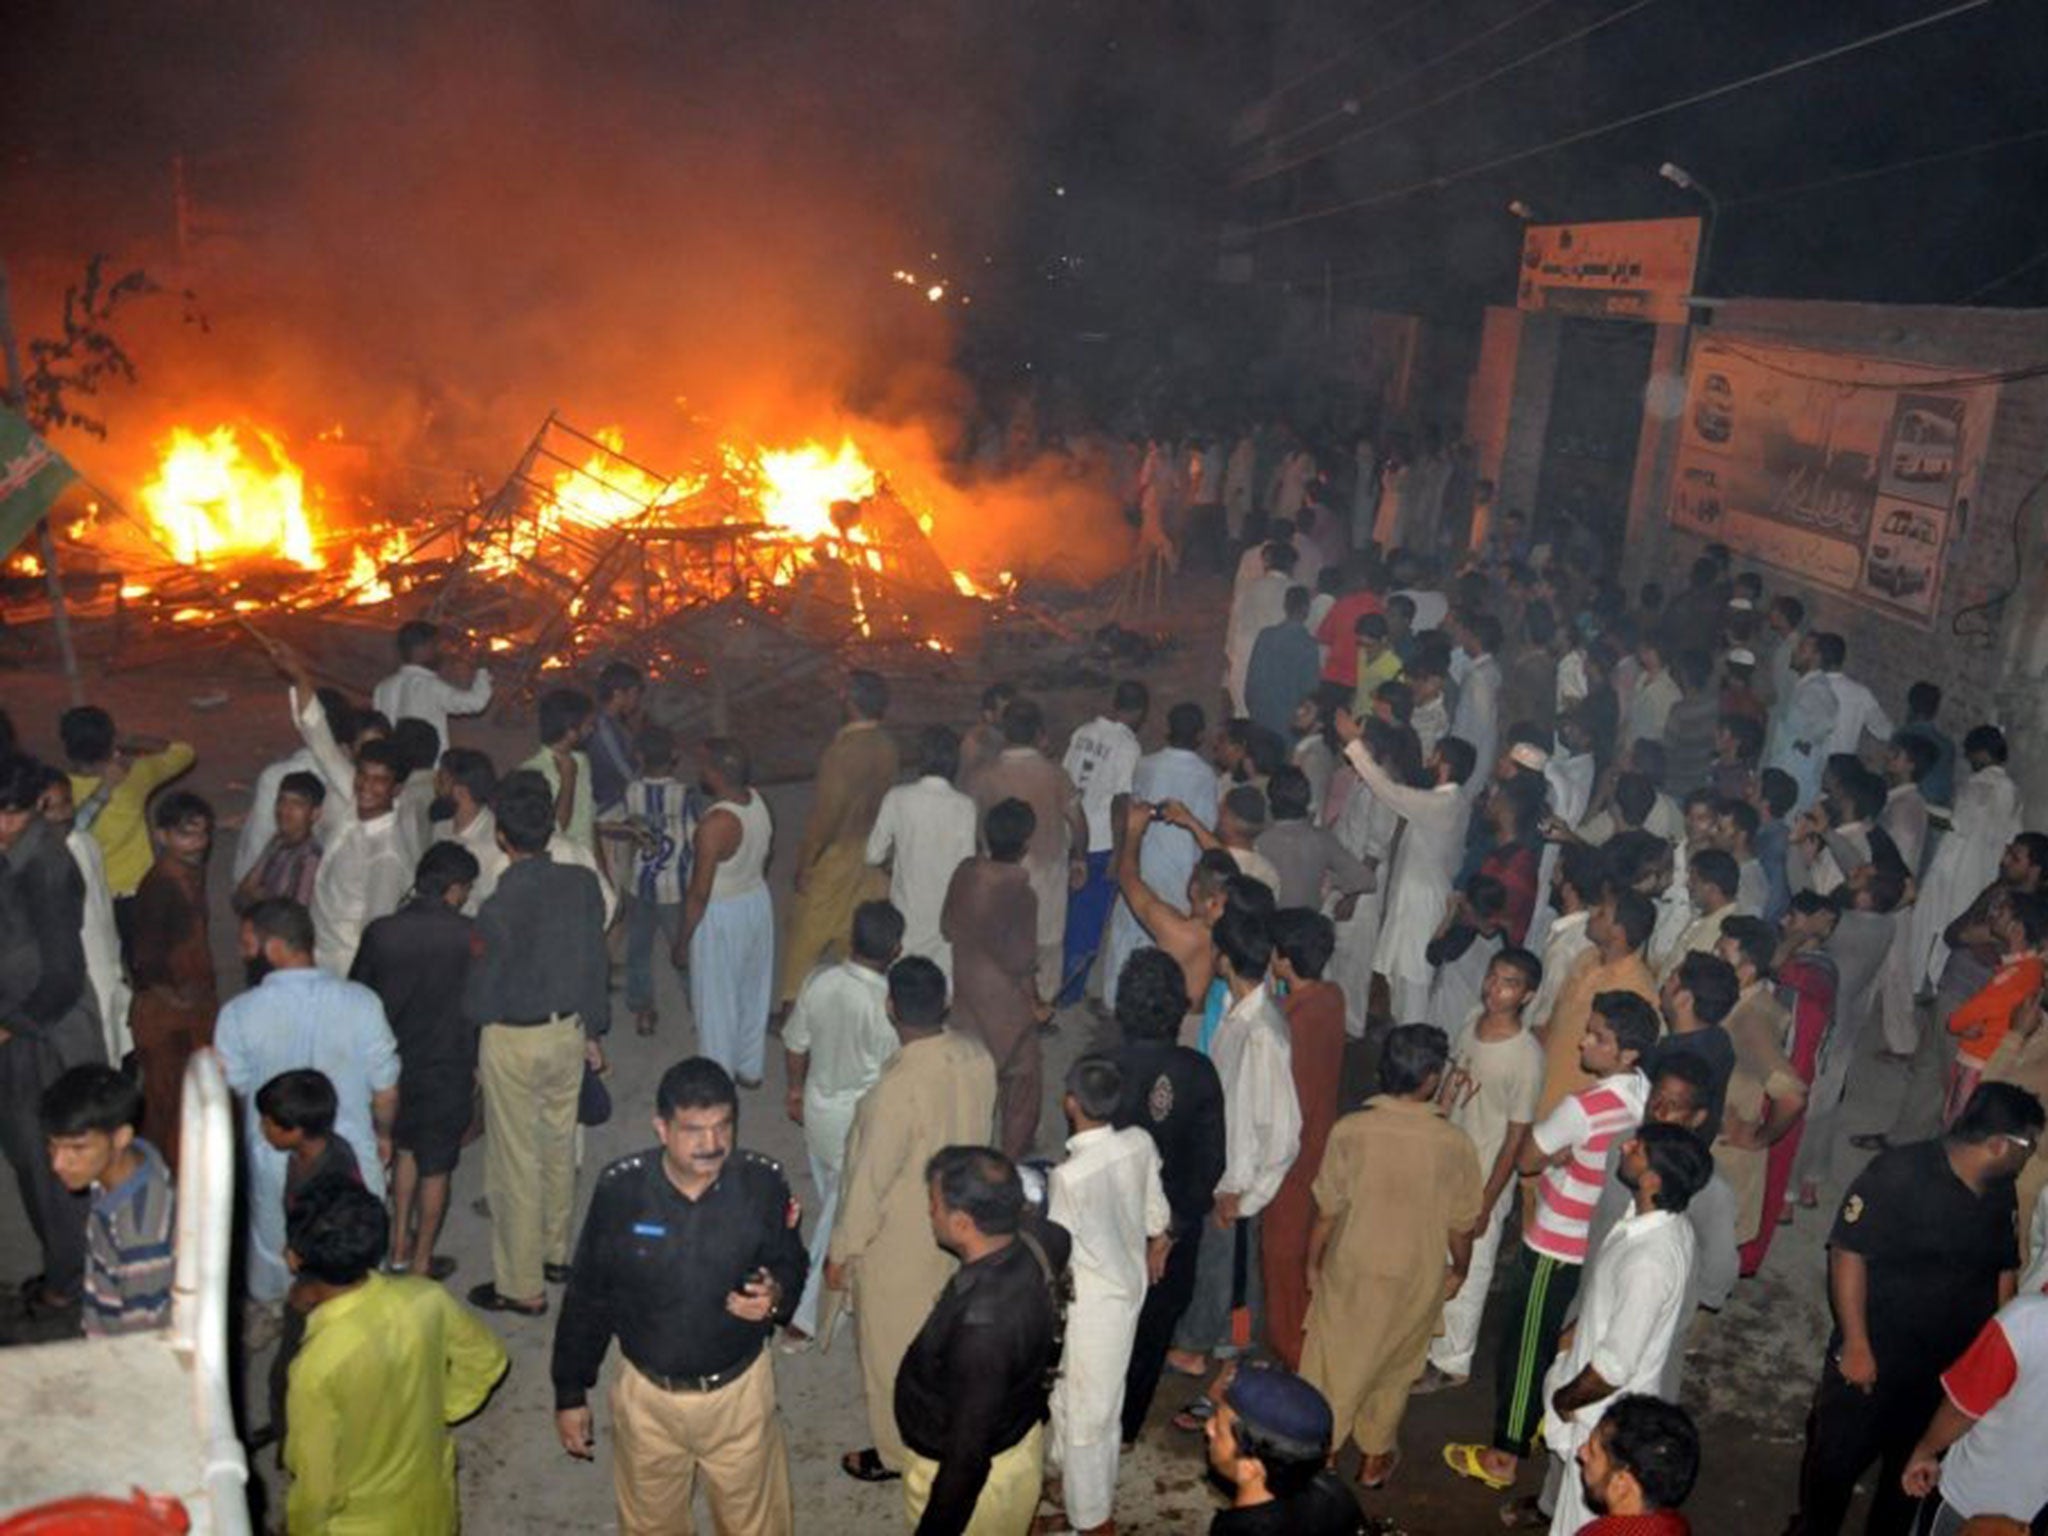 Police arrive after the houses of religious minority group Ahmadiyyas, were torched by a mob following accusations of blasphemy, in Gujranwala, Pakistan, 28 July 2014